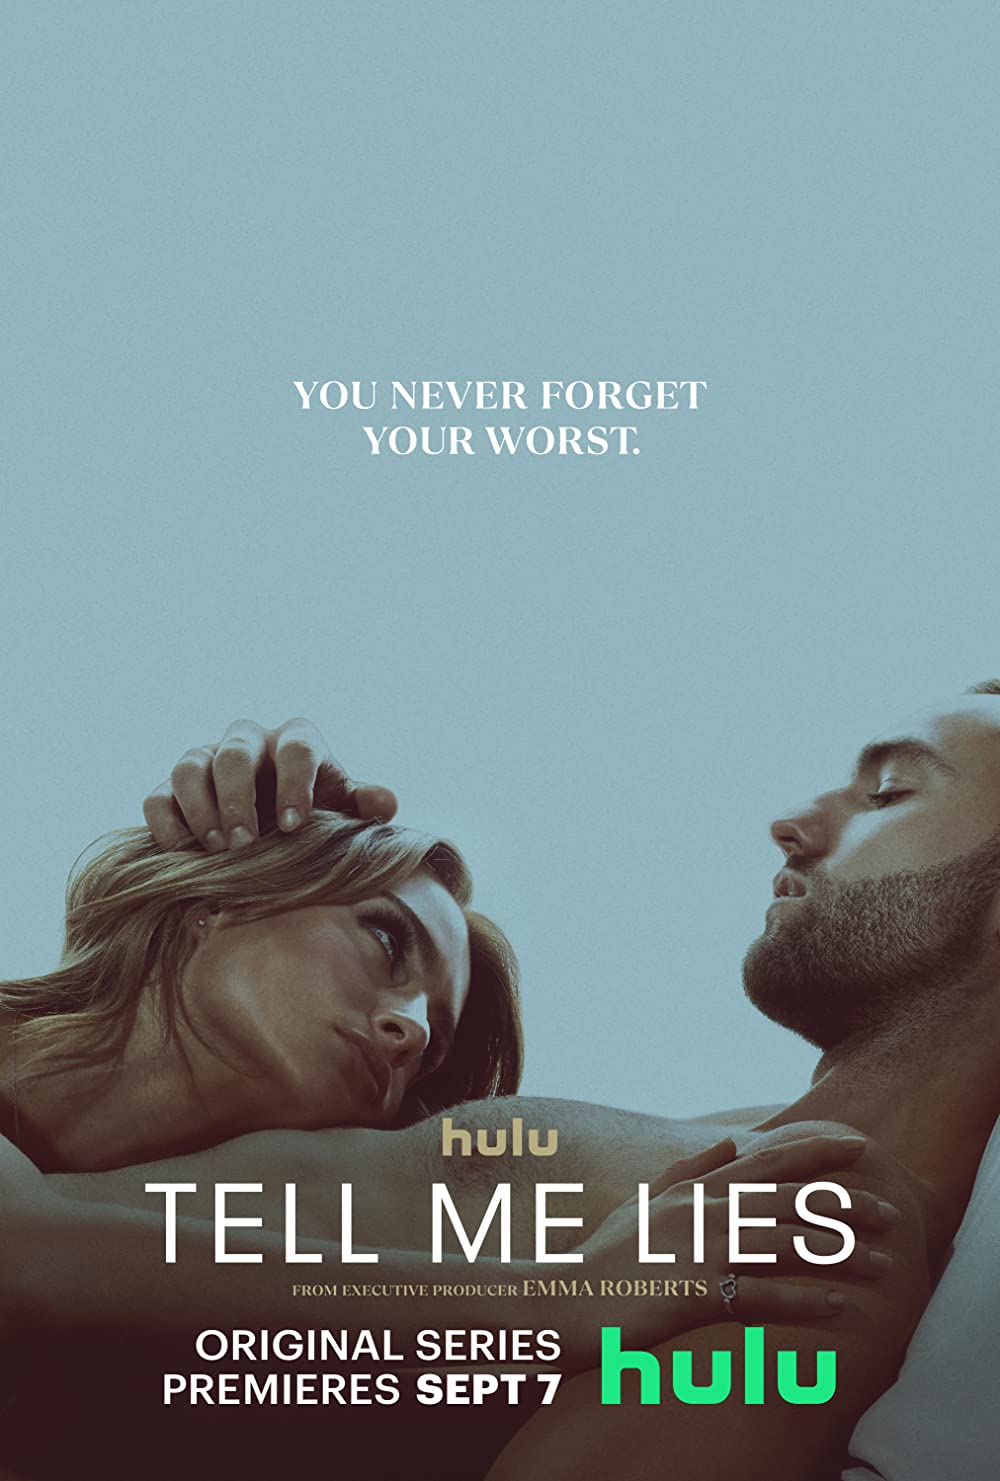 Tell Me Lies: Release date, plot, cast, trailer, and more details